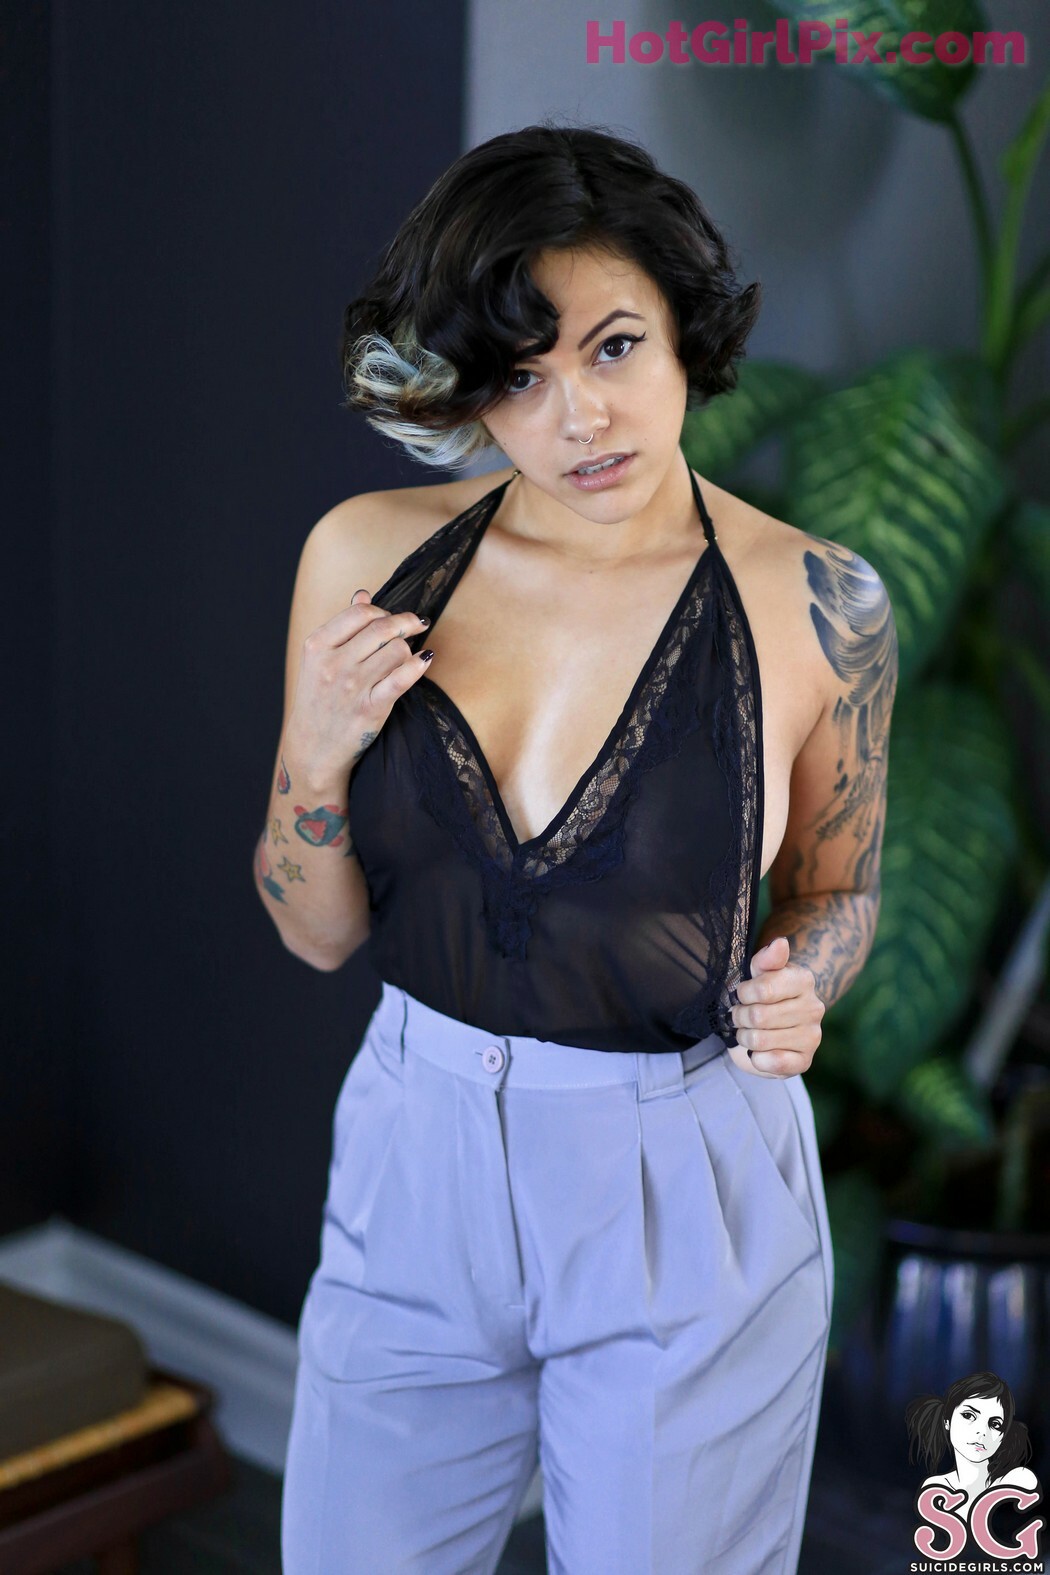 [Suicide Girls] Bixton - 'I have to see a man about a dog'